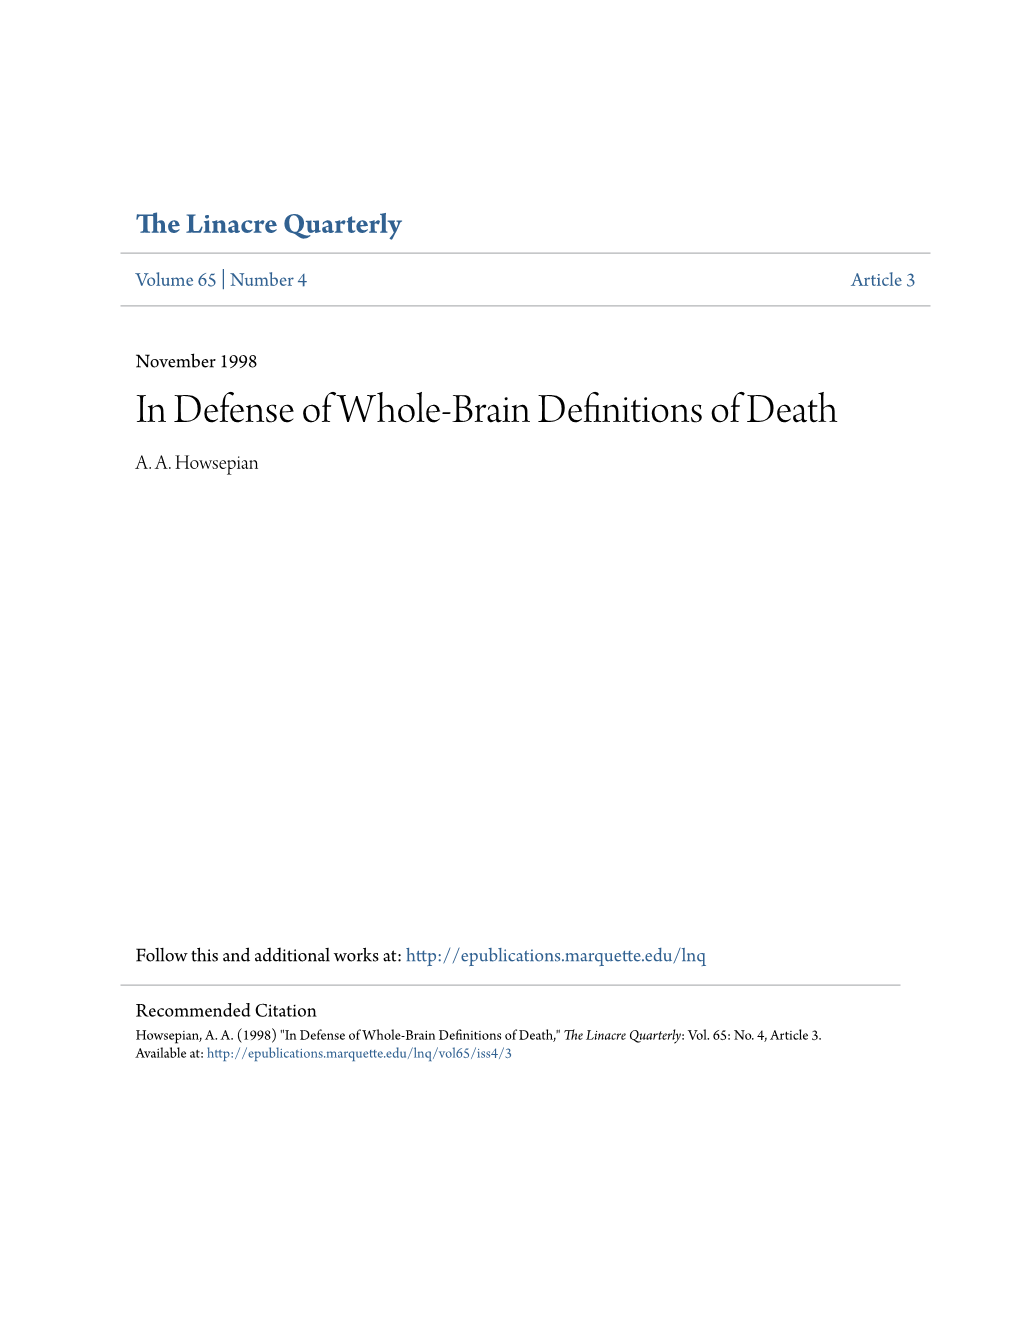 In Defense of Whole-Brain Definitions of Death A